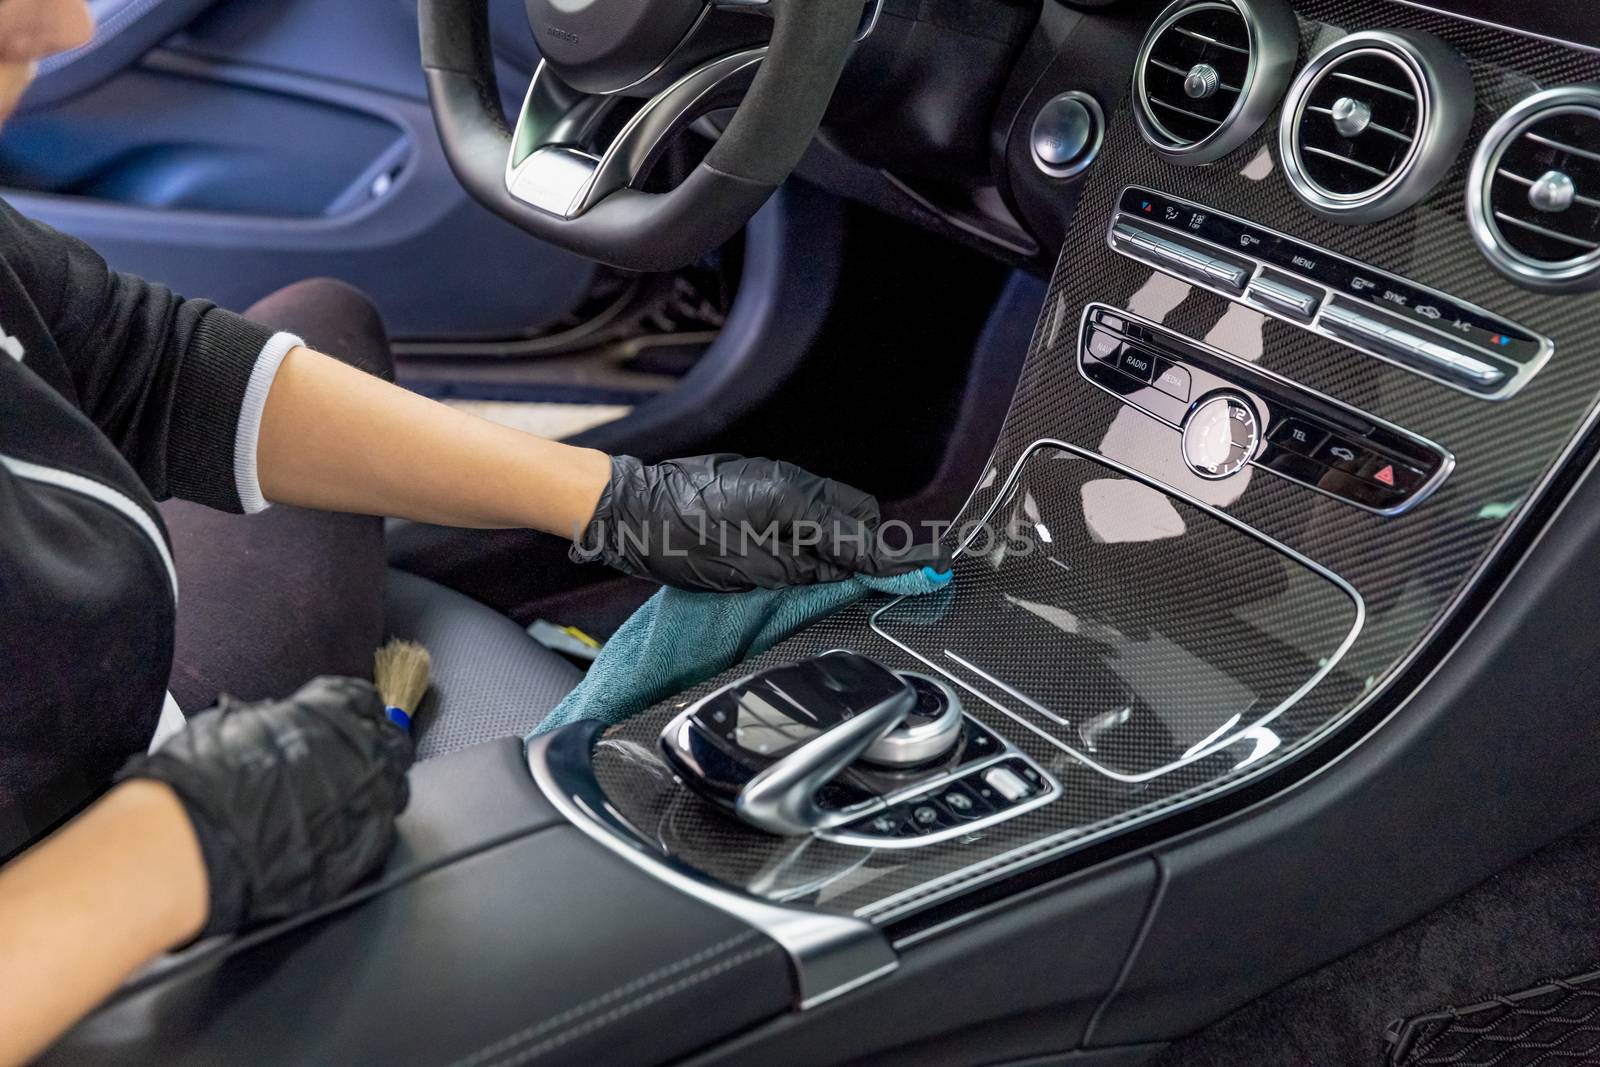 cleaning the interior of a luxury car with the help of chemistry with nanotechnology by Edophoto